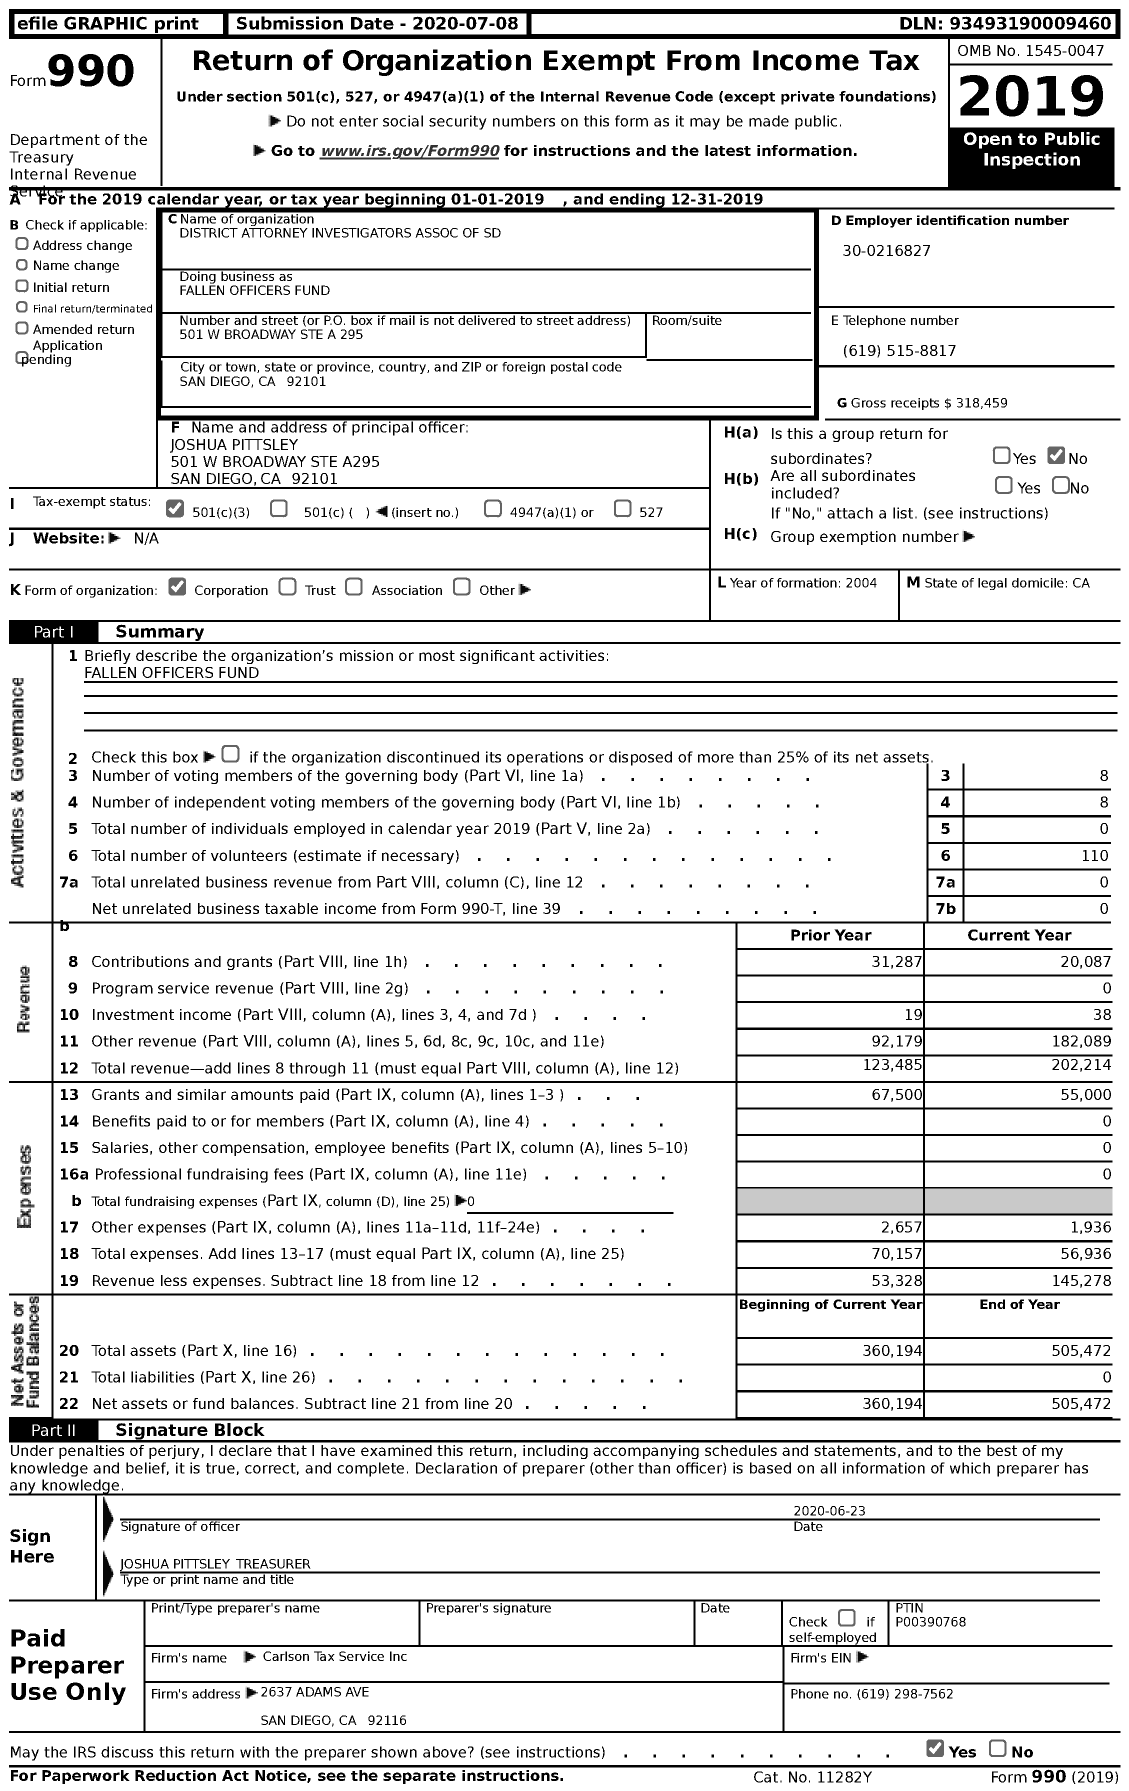 Image of first page of 2019 Form 990 for Fallen Officers Fund